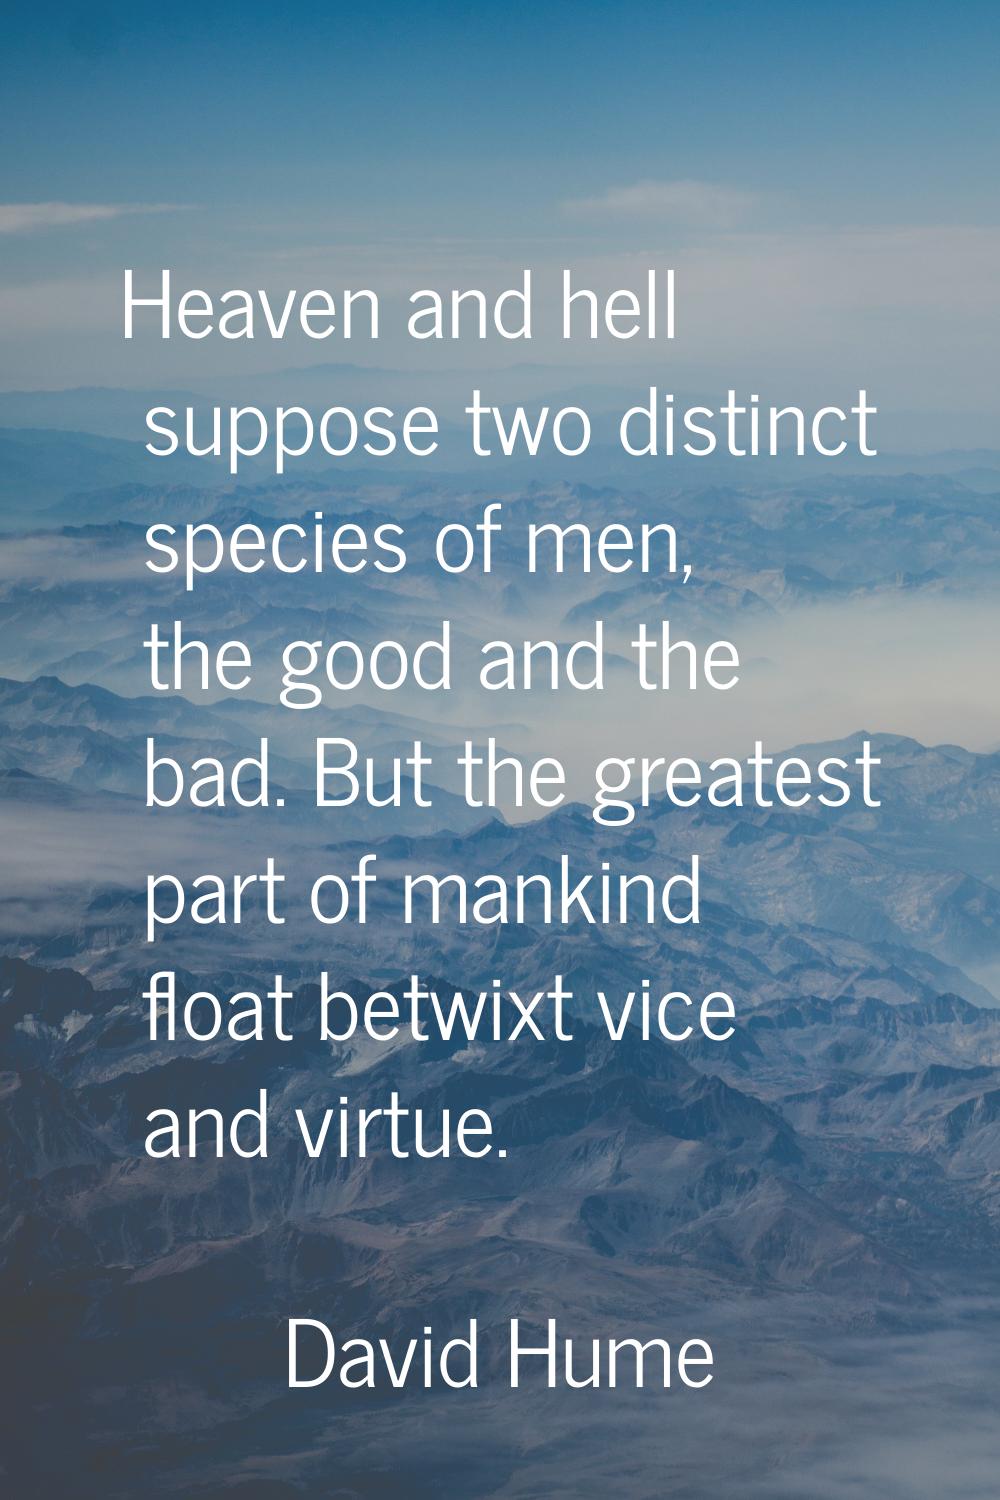 Heaven and hell suppose two distinct species of men, the good and the bad. But the greatest part of